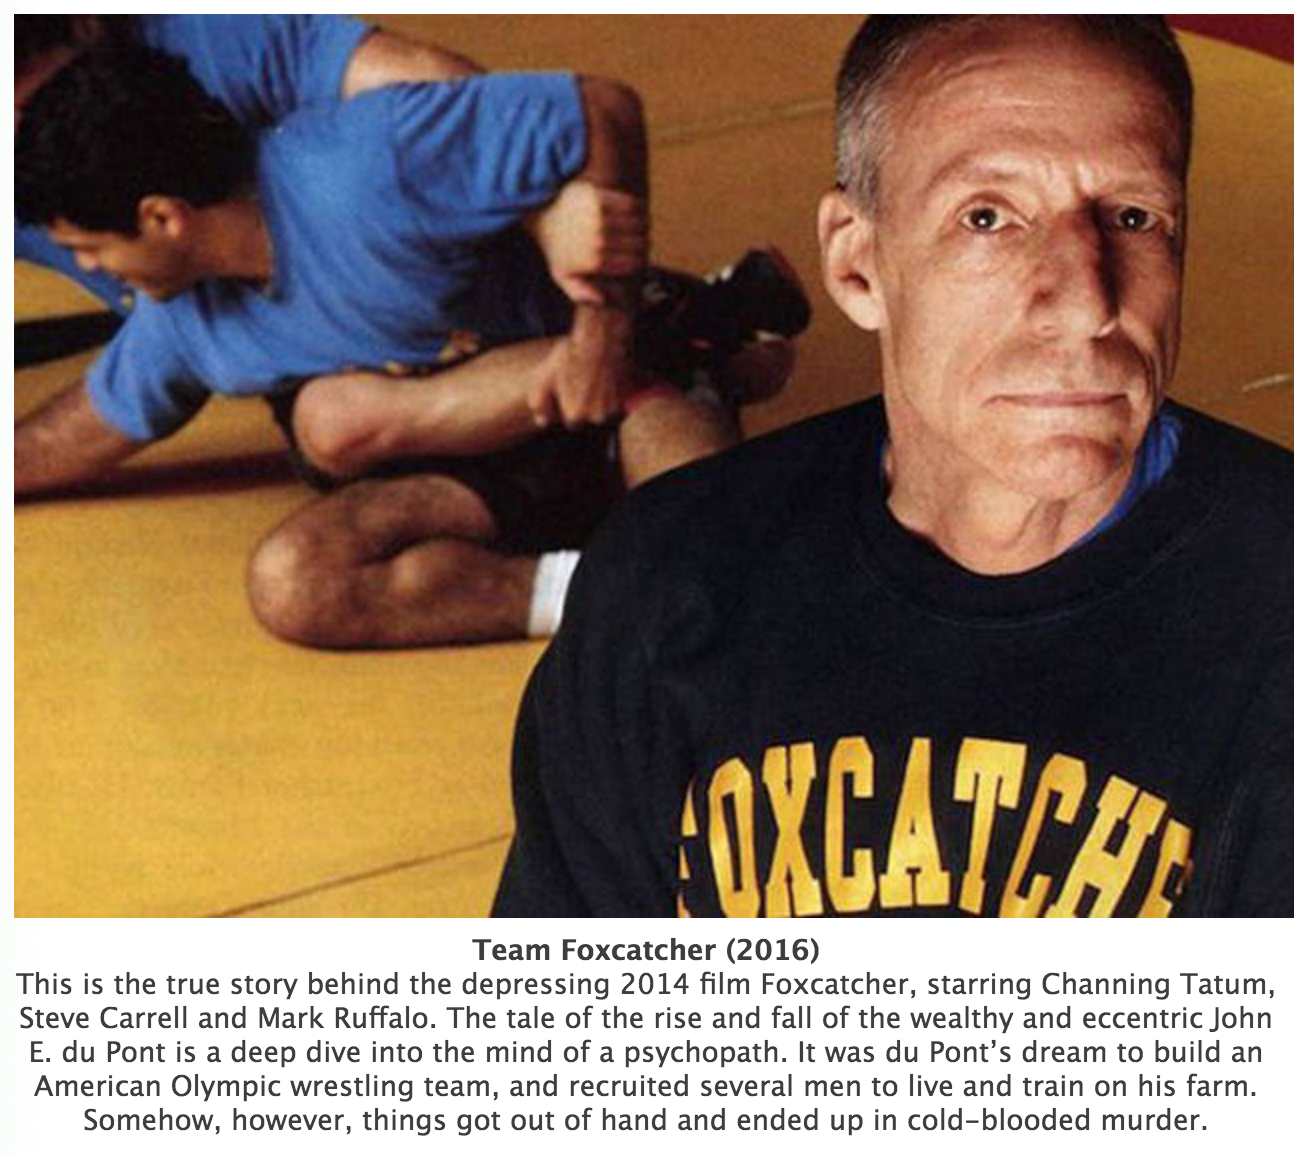 team foxcatcher - Oxcatch Team Foxcatcher 2016 This is the true story behind the depressing 2014 film Foxcatcher, starring Channing Tatum, Steve Carrell and Mark Ruffalo. The tale of the rise and fall of the wealthy and eccentric John E. du Pont is a deep